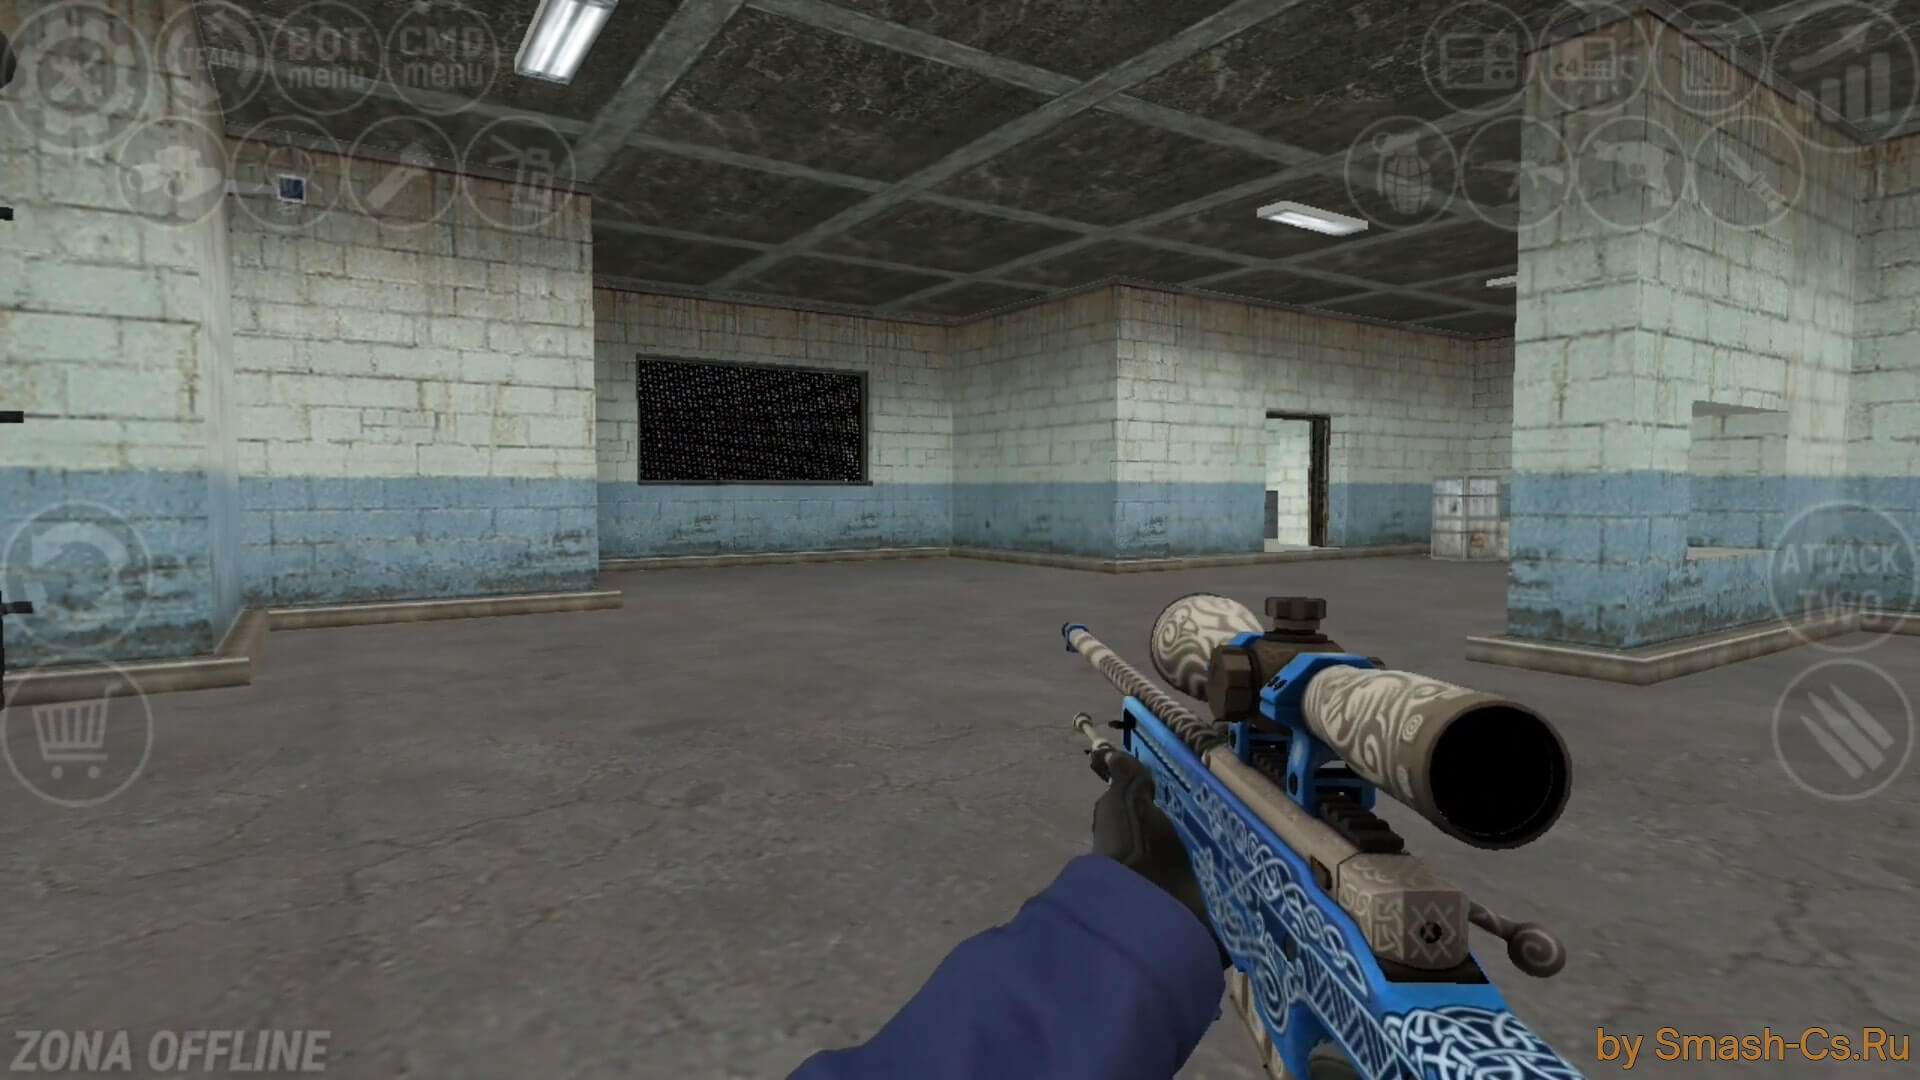 CS 1.6 Client - Counter Strike 1.6 Mobile APK 1.35 - Download Free